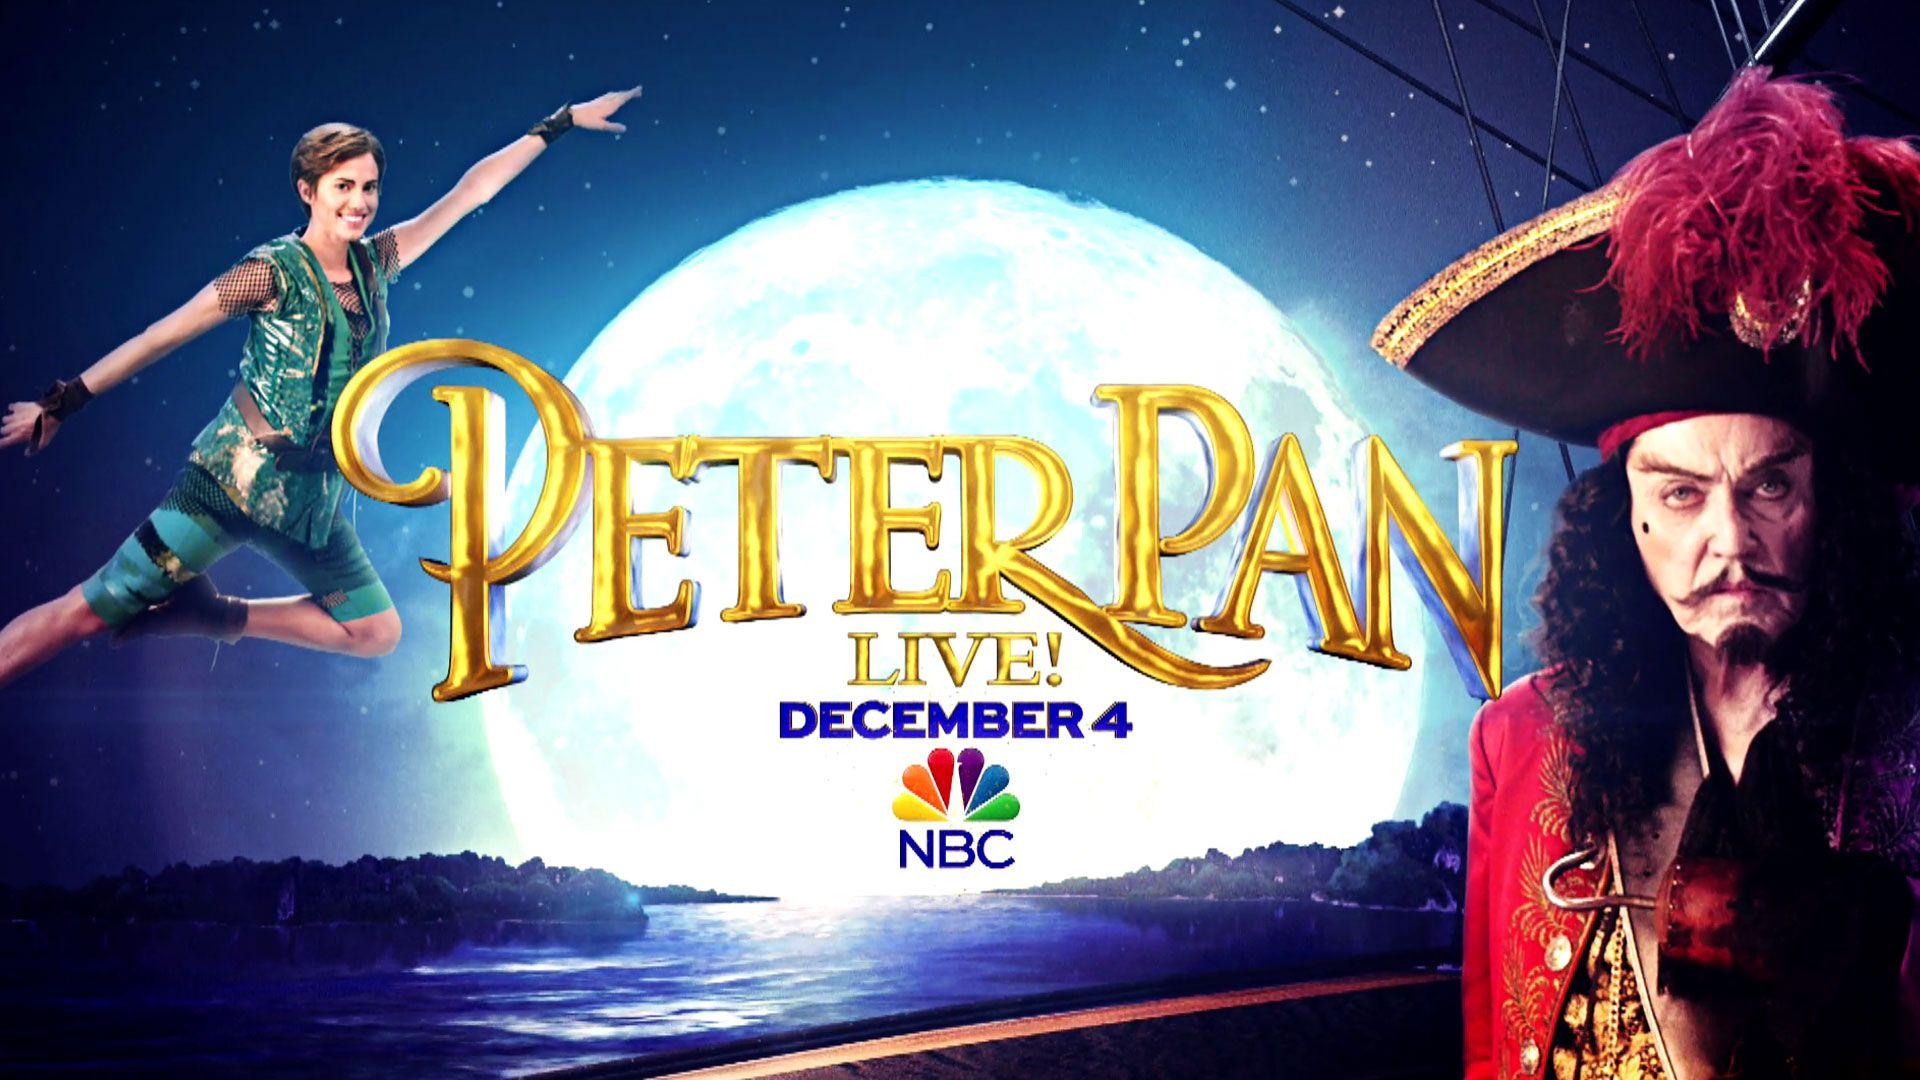 Watch NBC's 'Peter Pan LIVE!' Tonight Life With Jane